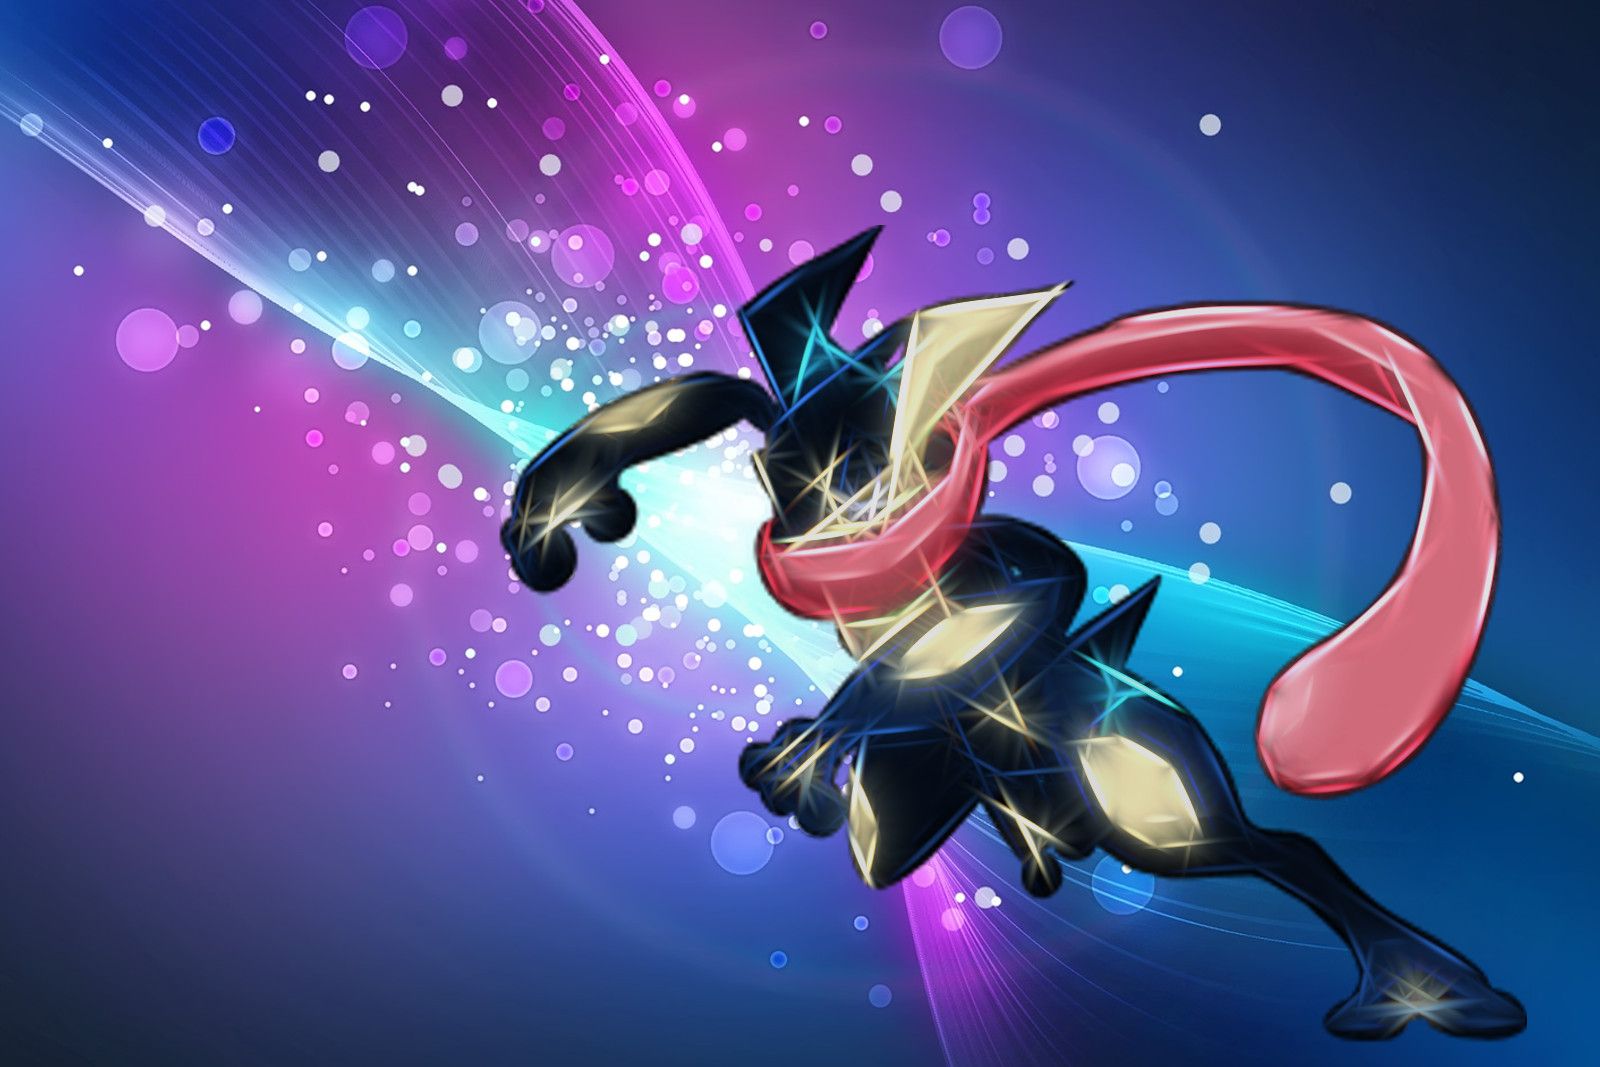 Download Your Master Ball Failed Pokemon Global Academy  Cool Greninja  Wallpapers For Iphone  Full Size PNG Image  PNGkit